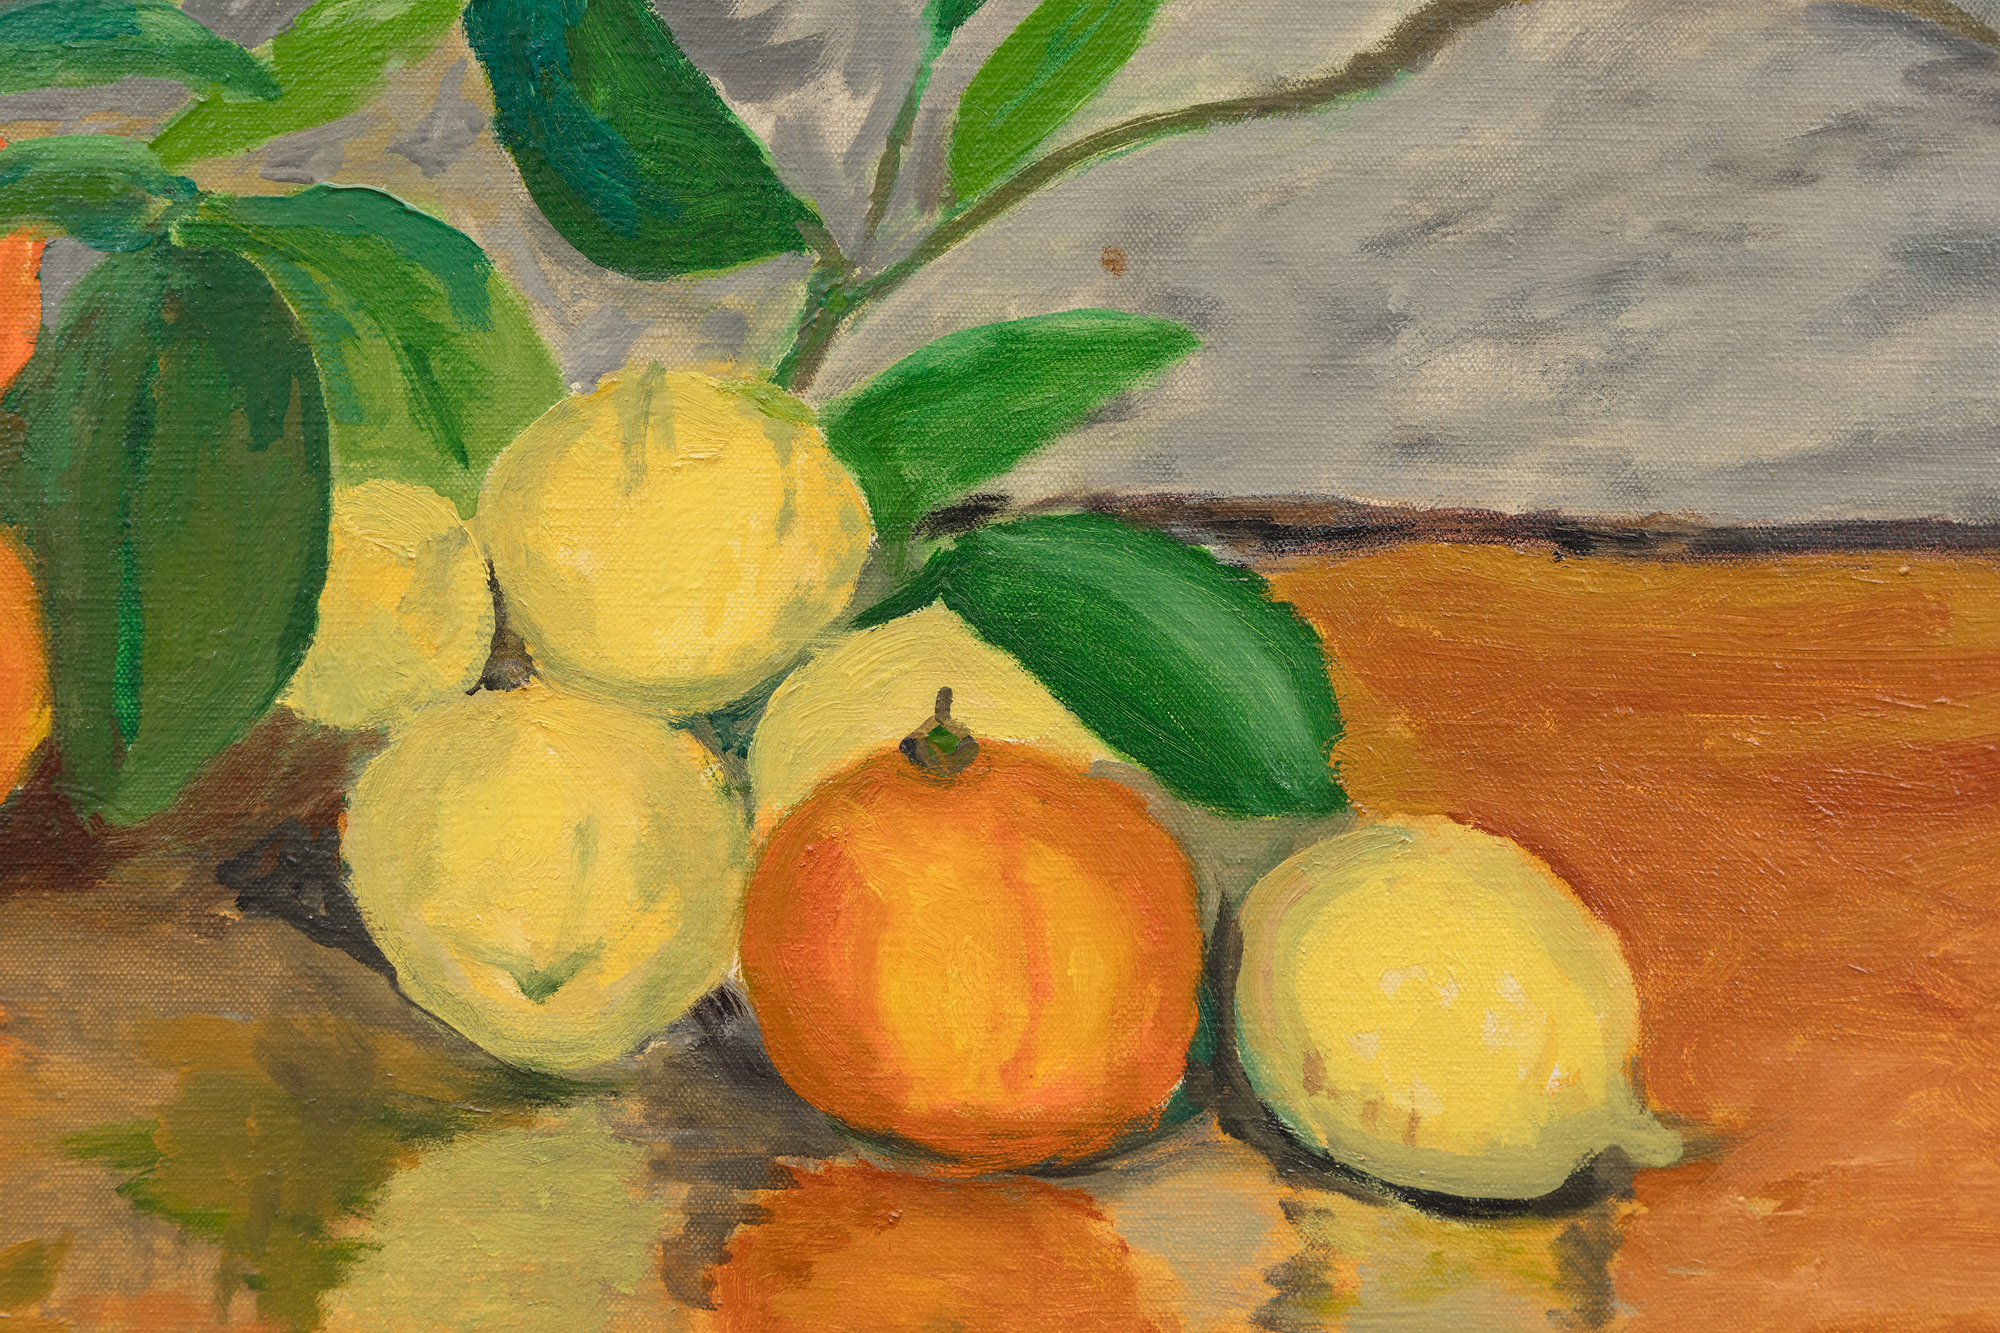 Still lifes like Oranges and Lemons (C 455) give us an insight to the rich and colorful life of Churchill, just as his landscapes and seascapes do. Churchill painted Oranges and Lemons at La Pausa. Churchill would often frequent La Pausa as the guest of his literary agent, Emery Reves and his wife, Wendy.  Reves purchased the home from Coco Chanel.  While other members of the Churchill family did not share his enthusiasm, Churchill and his daughter Sarah loved the place, which Churchill affectionately called “LaPausaland”.&lt;br&gt;&lt;br&gt;To avoid painting outside on a chilly January morning, Wendy Reves arranged the fruit for Churchill to paint. Surrounded by the Reves’s superb collection of Impressionist and Post-Impressionist works, including a number of paintings by Paul Cézanne, Oranges and Lemons illuminates Churchill’s relationships and the influence of Cézanne, who he admired. The painting, like Churchill, has lived a colorful life, exhibited at both the 1959 Royal Academy of Art exhibition of his paintings and the 1965 New York World’s Fair.